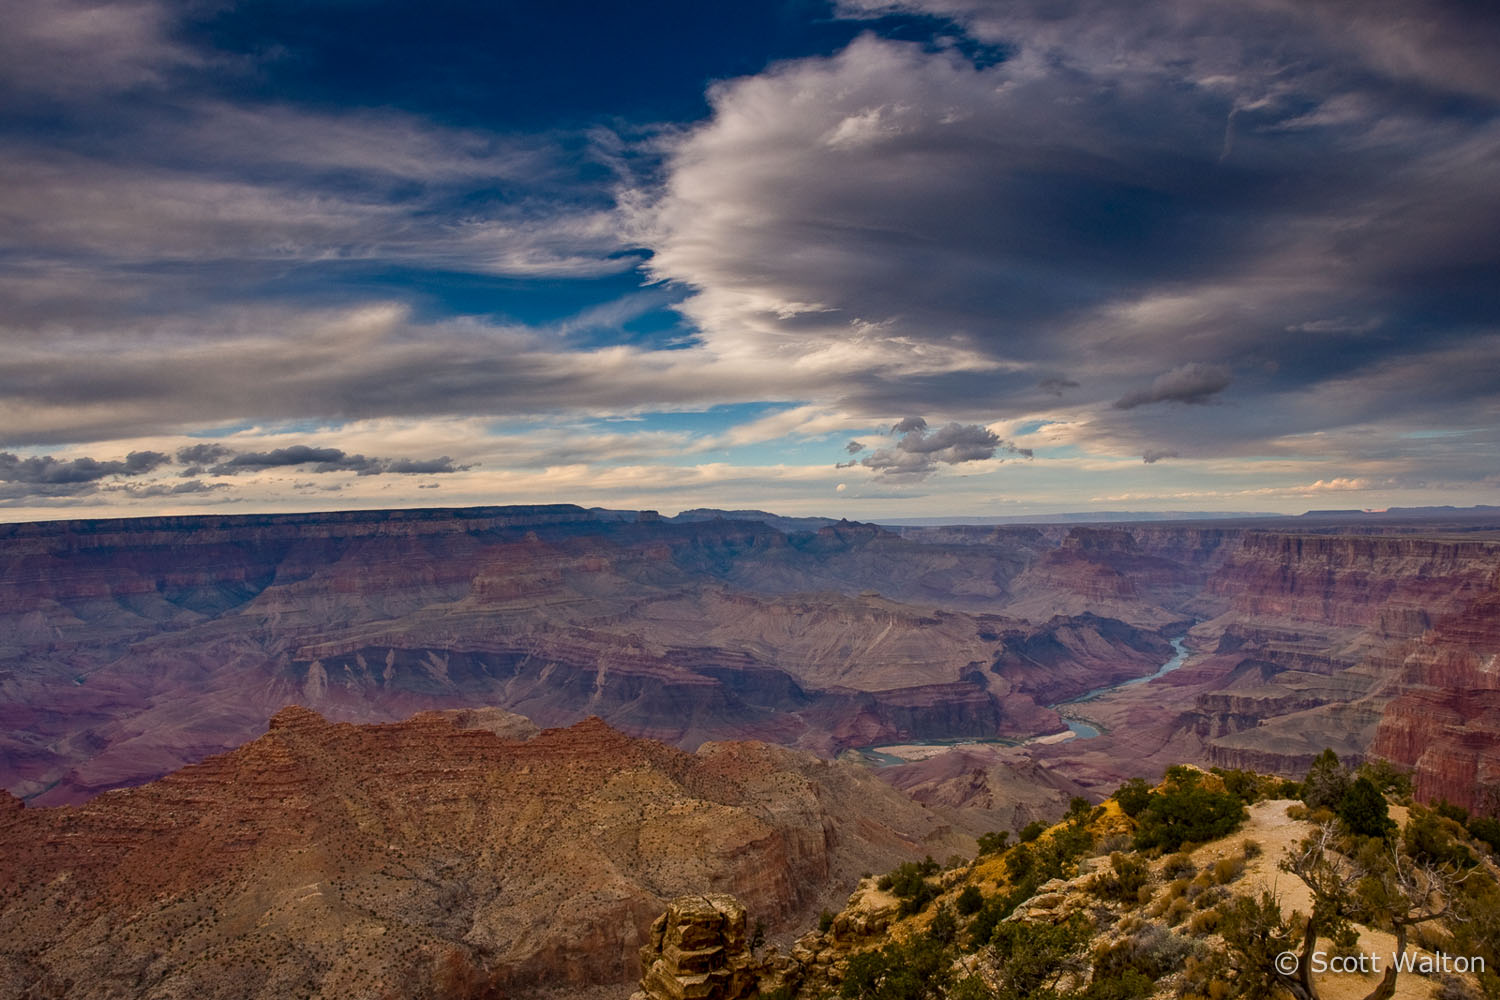 desert-view-clearing-storm-color2-grand-canyon-national-park-arizona.jpg